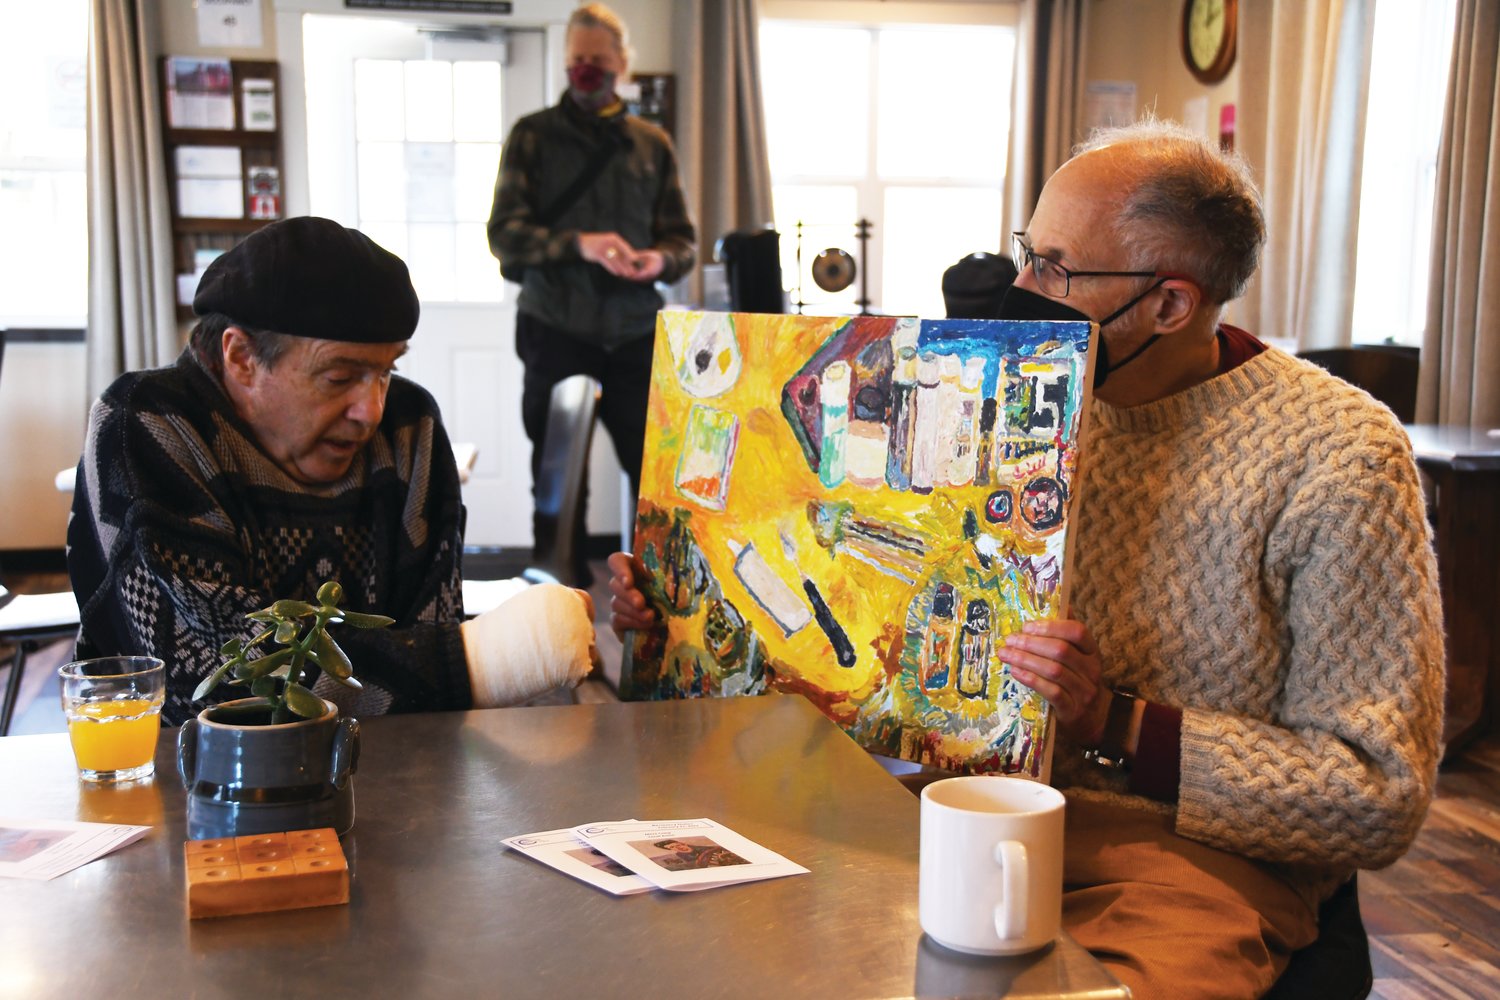 Craig Rogers shares the inspiration behind “The Artist’s Studio” while close friend Robert Komishane holds the piece.